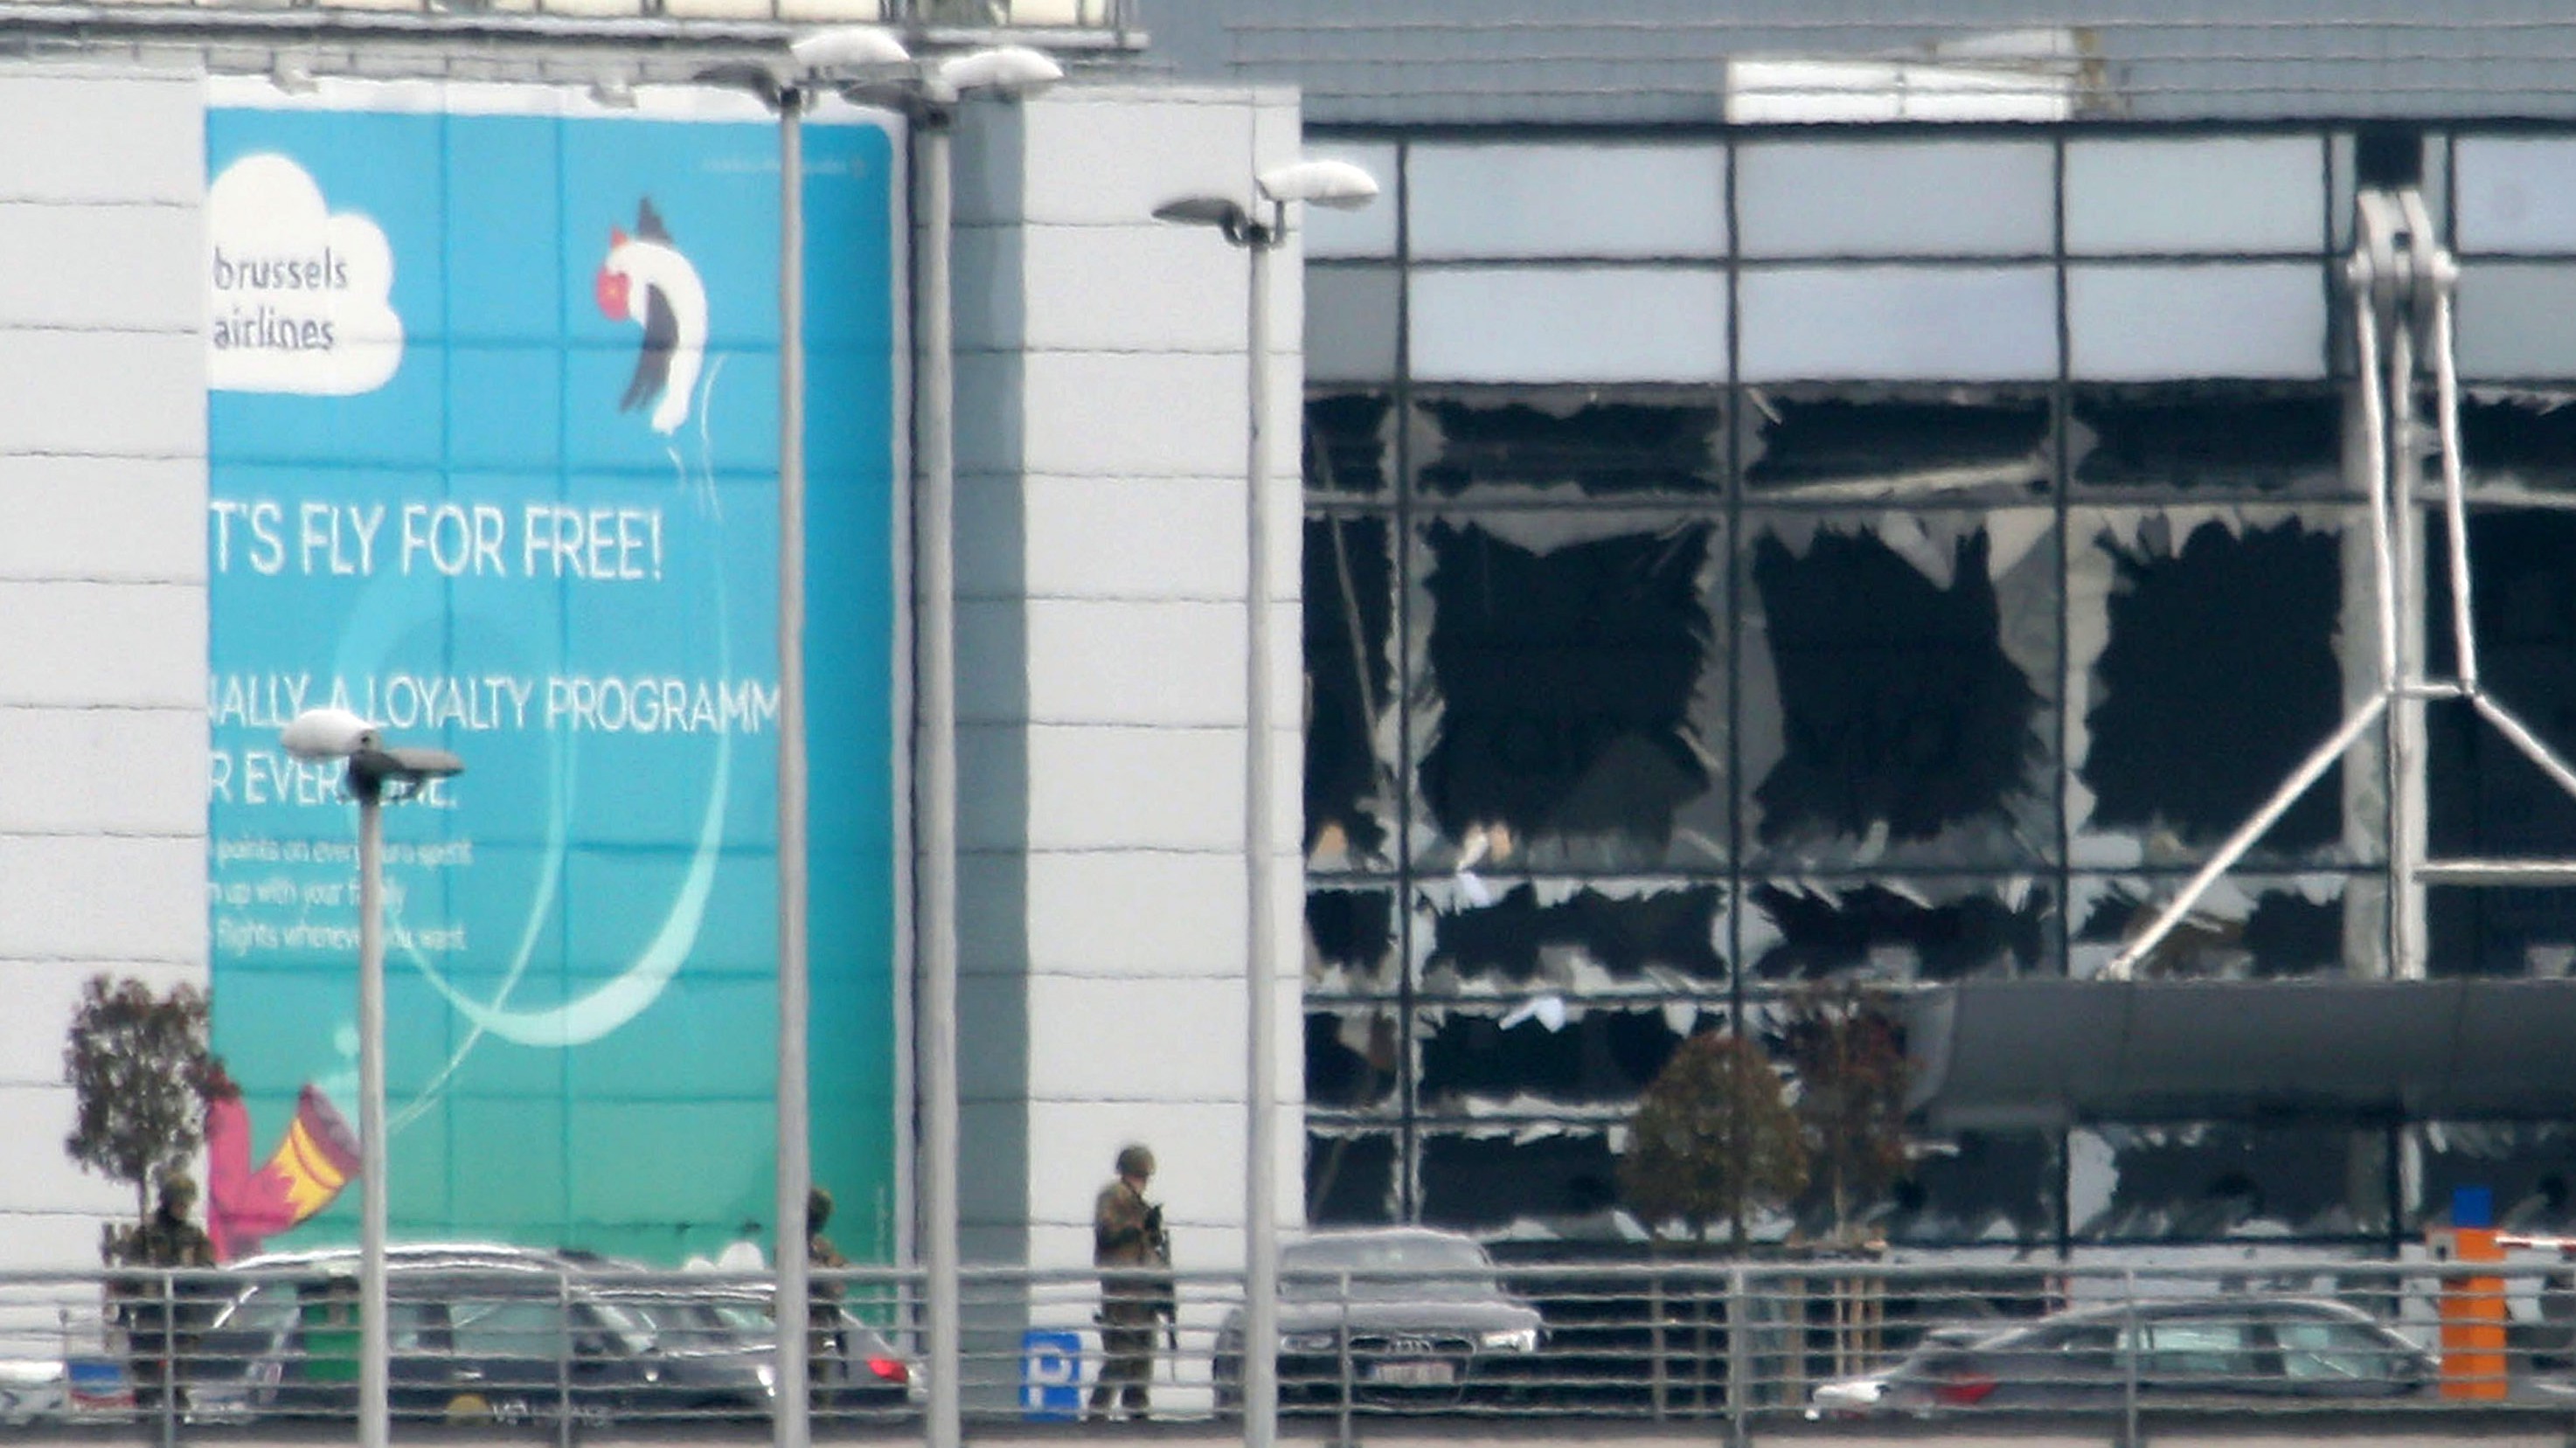 Crews and passengers being evacuated Zaventem Bruxelles International Airport after terrorist attacks. (Getty)